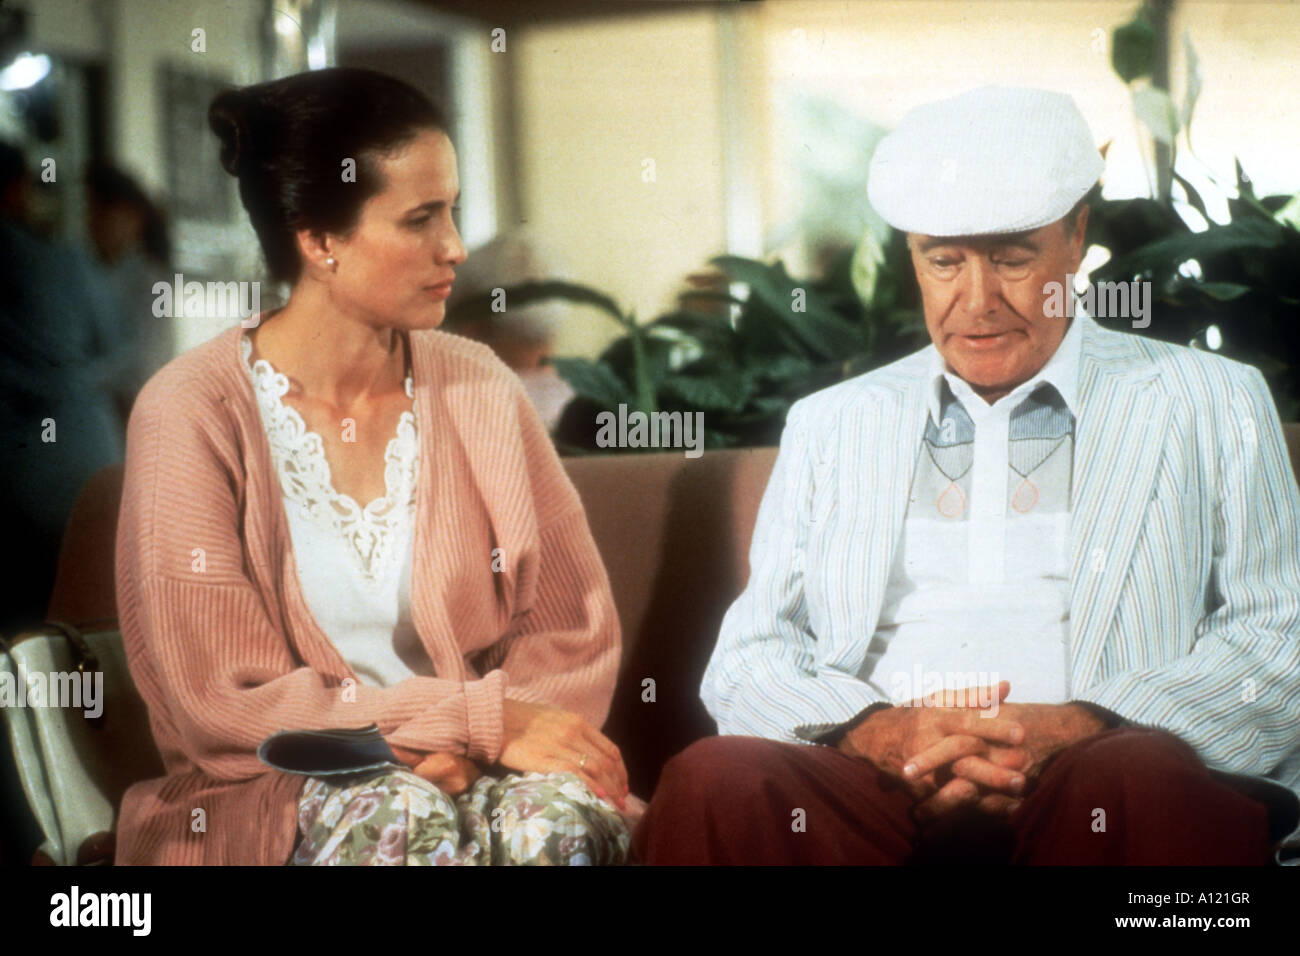 Short Cuts Year 1993 Director Robert Altman Andie McDowell Jack Lemmon Based upon Raymond Carver s book Stock Photo